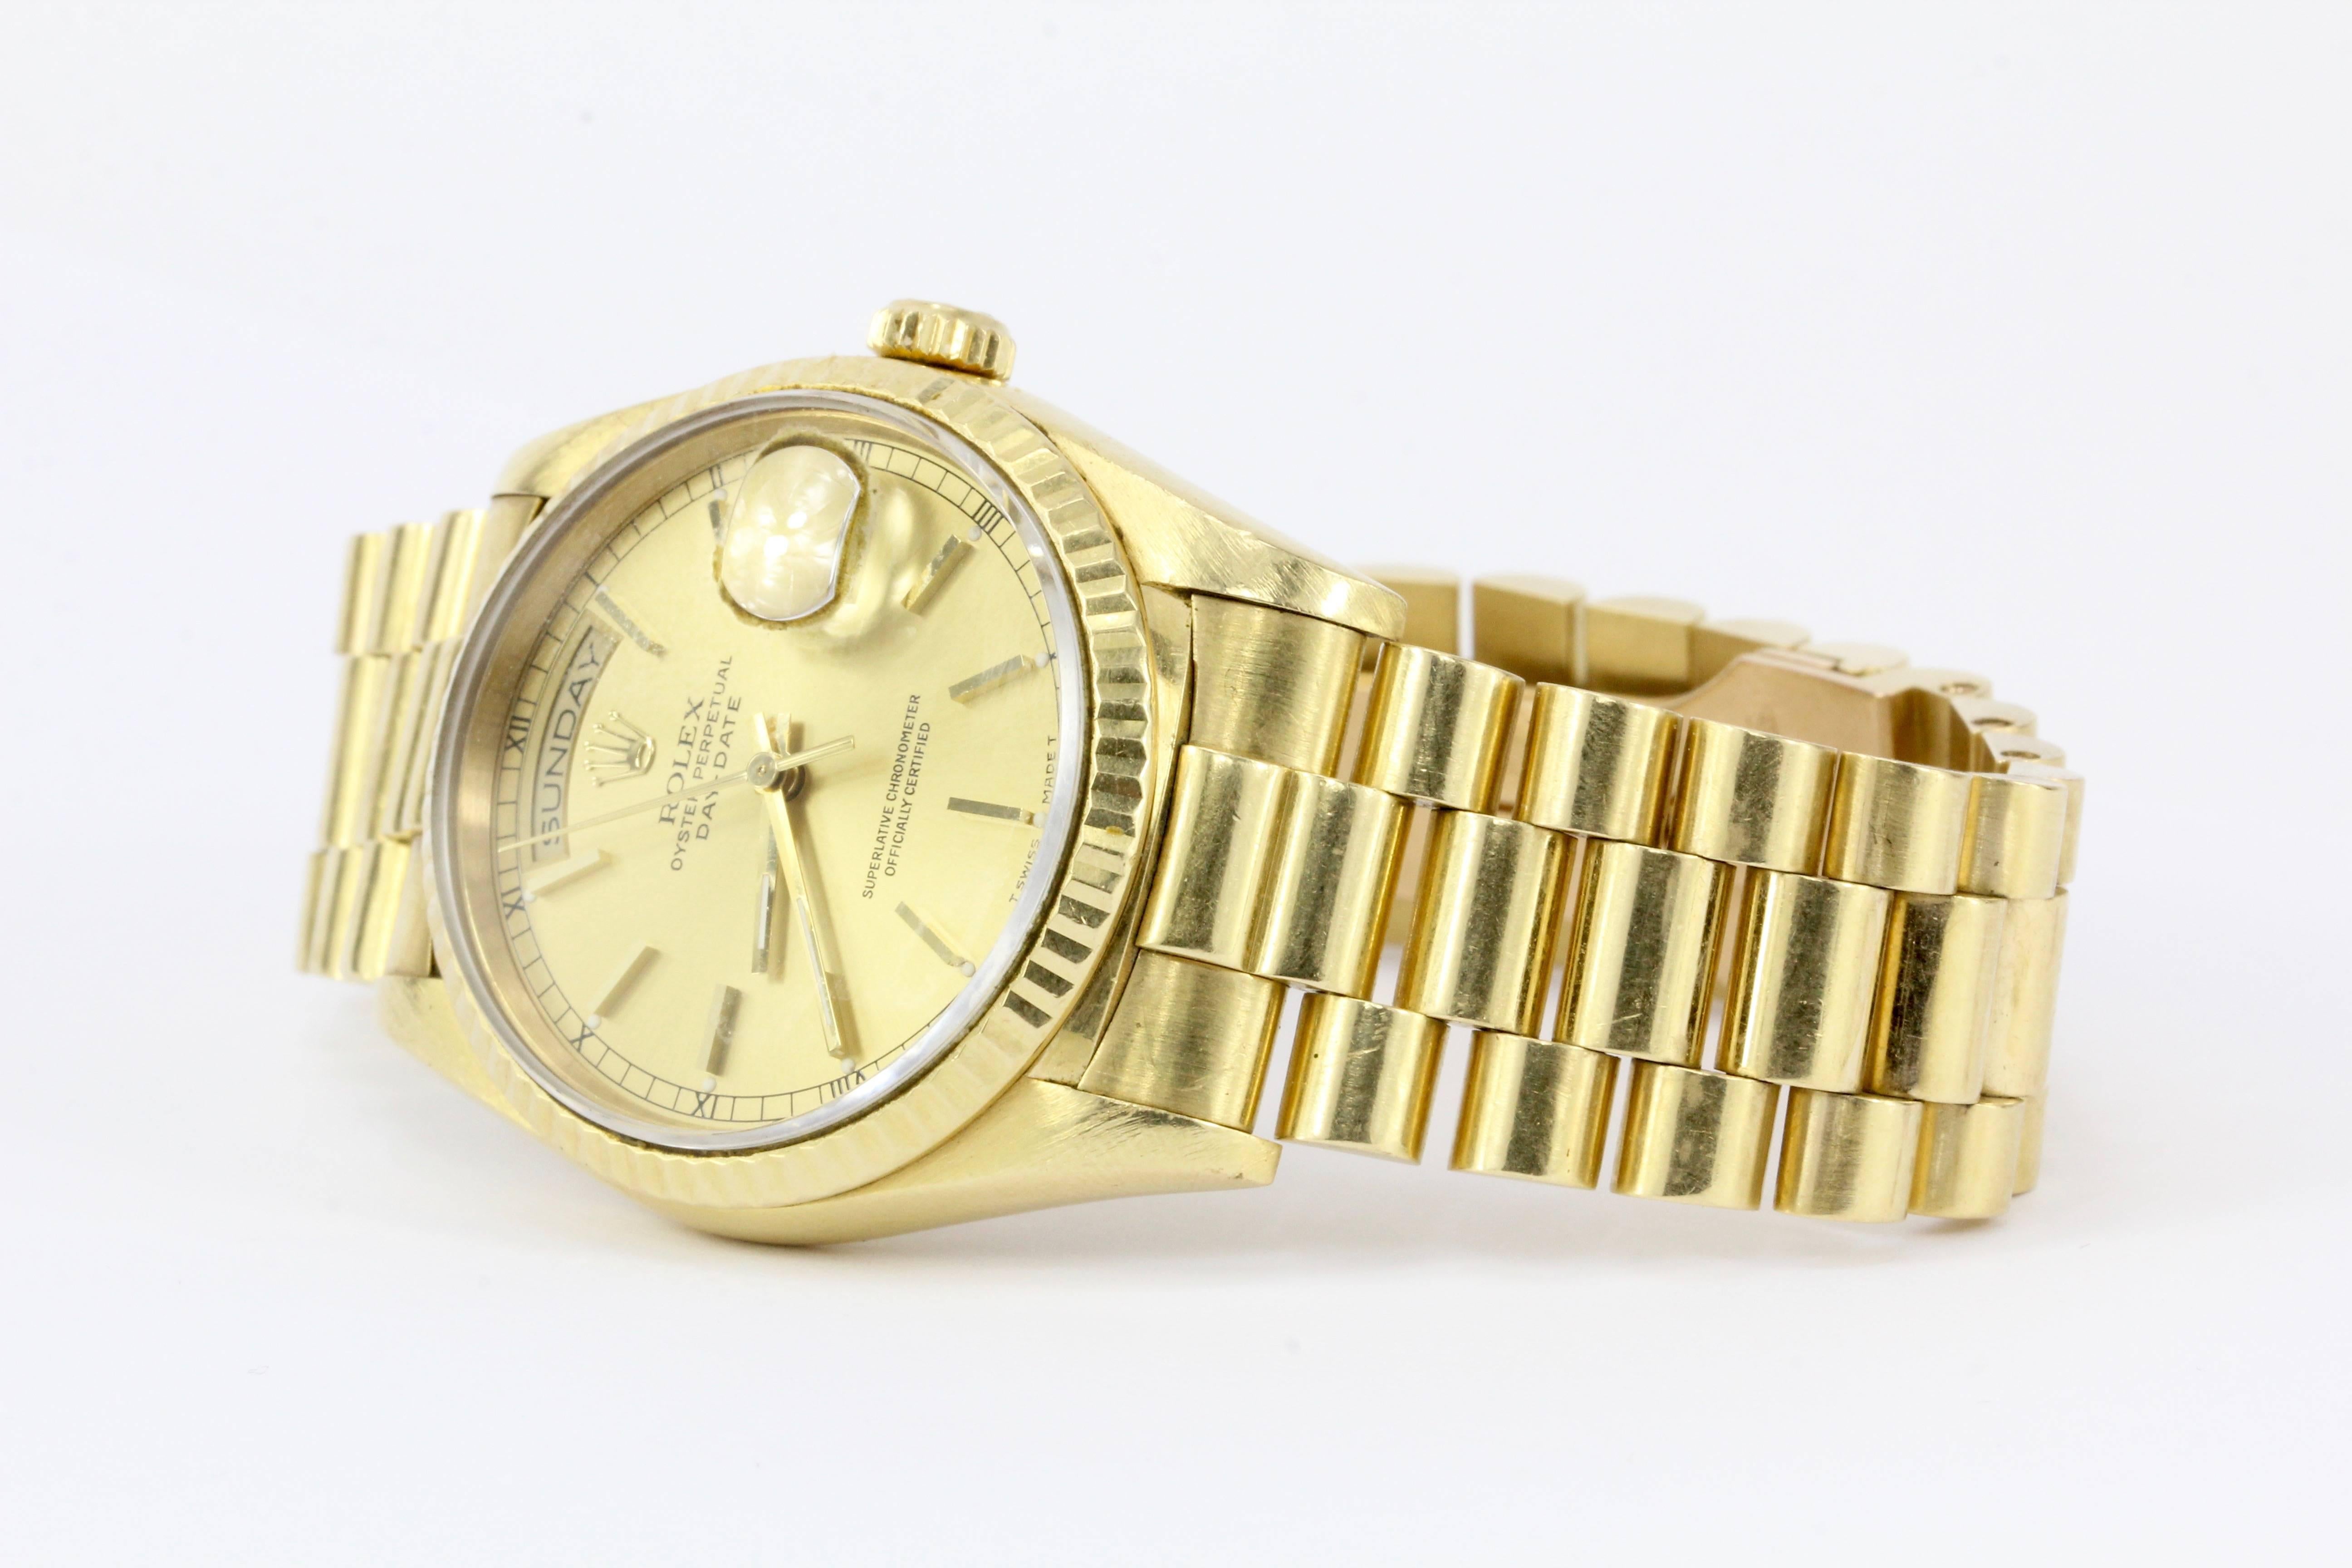 Rolex Presidential

Composition: Solid 18K Yellow Gold Case and Bracelet 

Model: 18238

Bezel: 36mm

Sapphire Crystal

L Serial Number Circa 1990

Handmade Swiss Automatic Movement

Comes with Box & Papers, original purchase receipt & Rolex